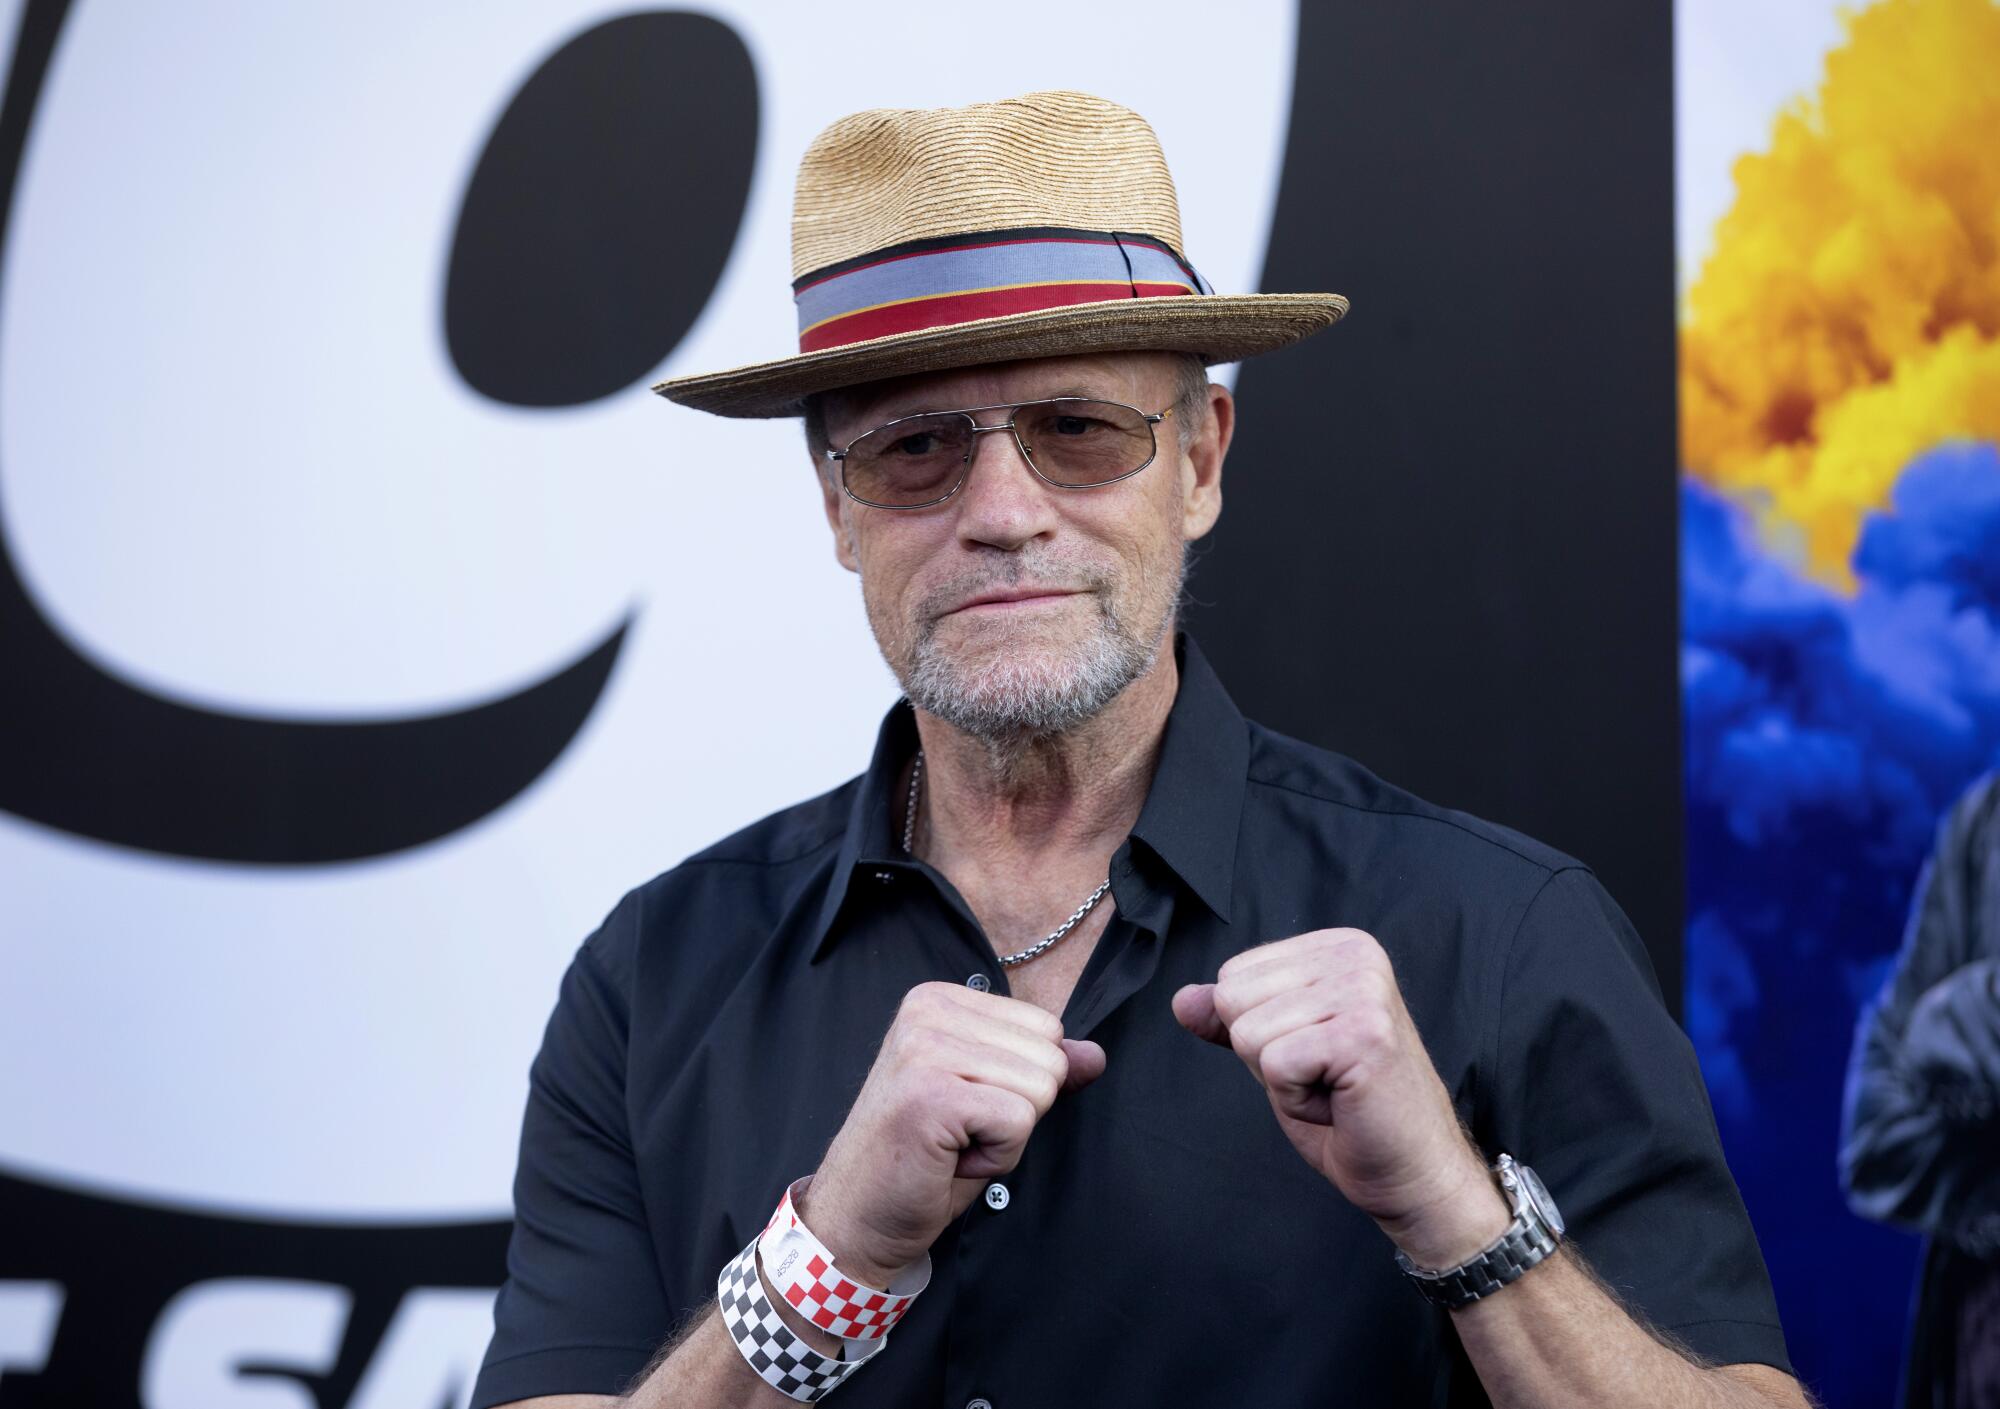 Unmasked Michael Rooker puts his fists up 